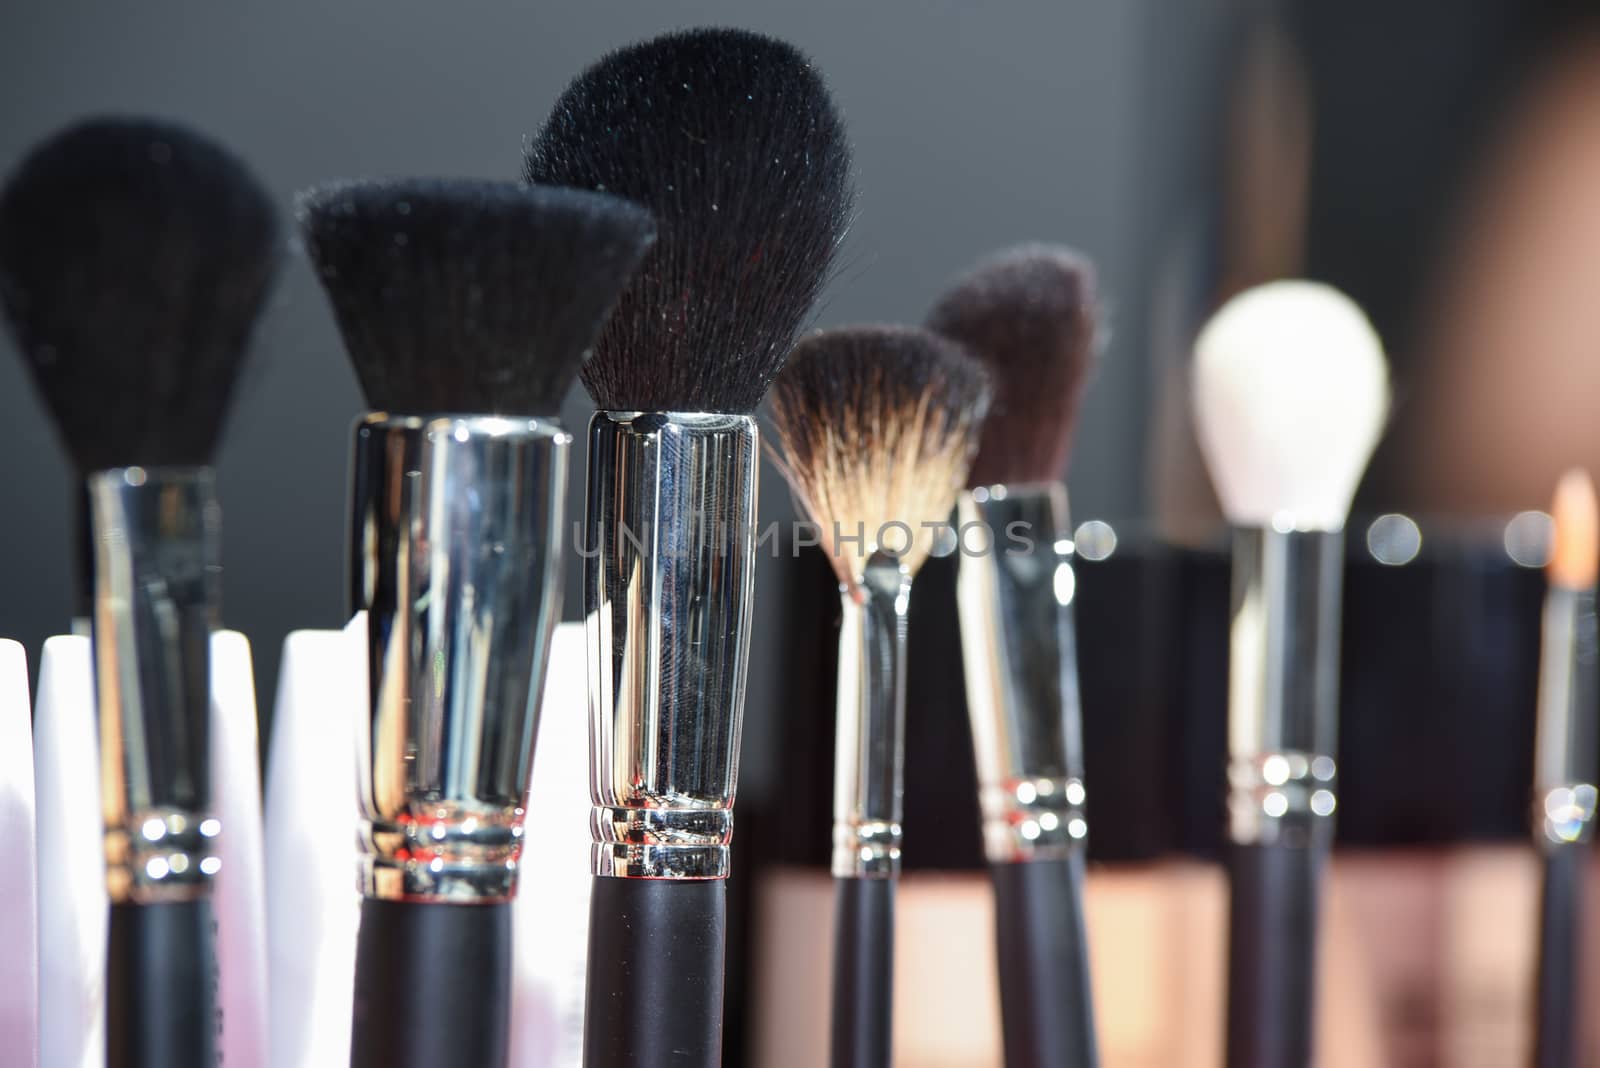 Professional makeup brushes by wdnet_studio